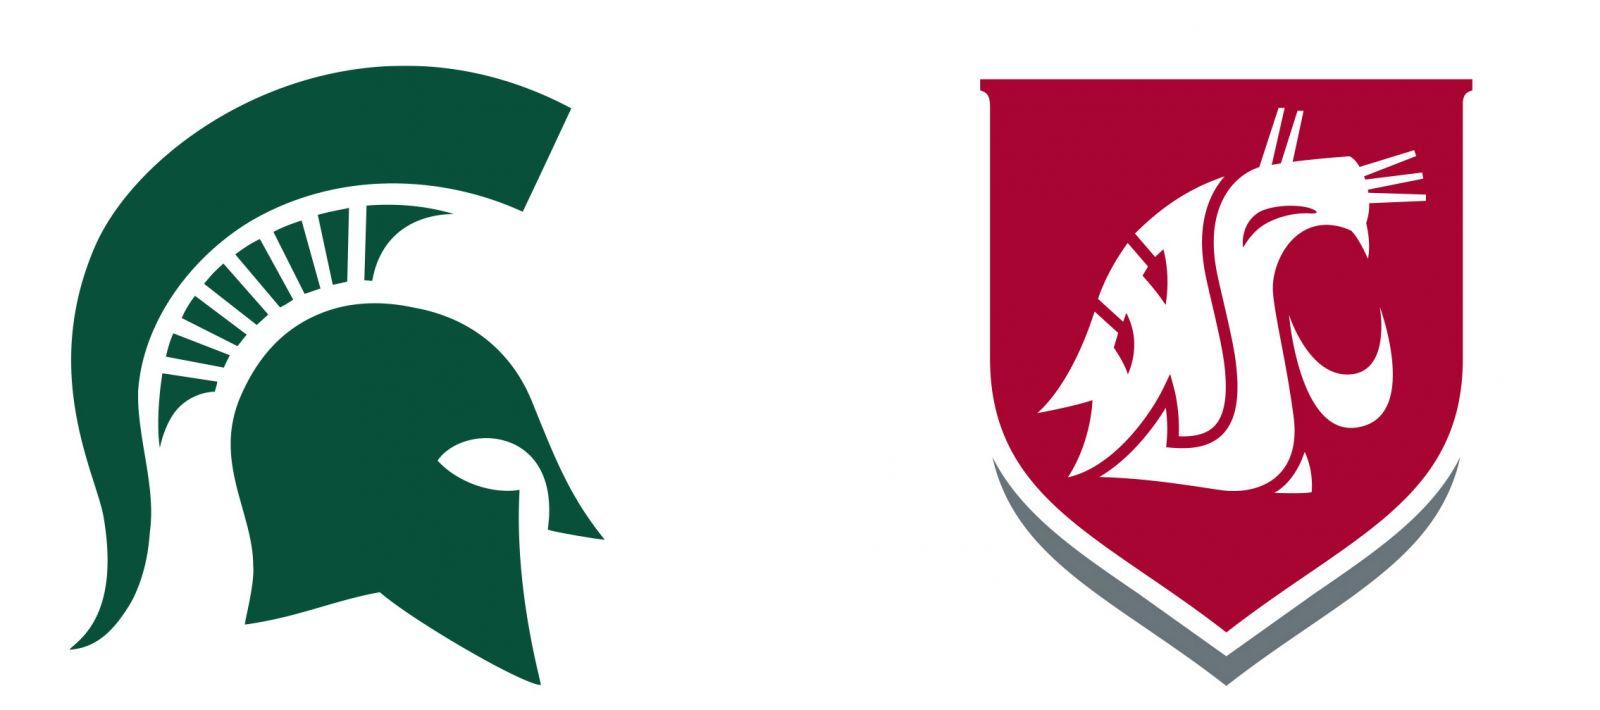 Academic Logo - Merging Athletic and Academic Logos | Call to Action: Marketing and ...